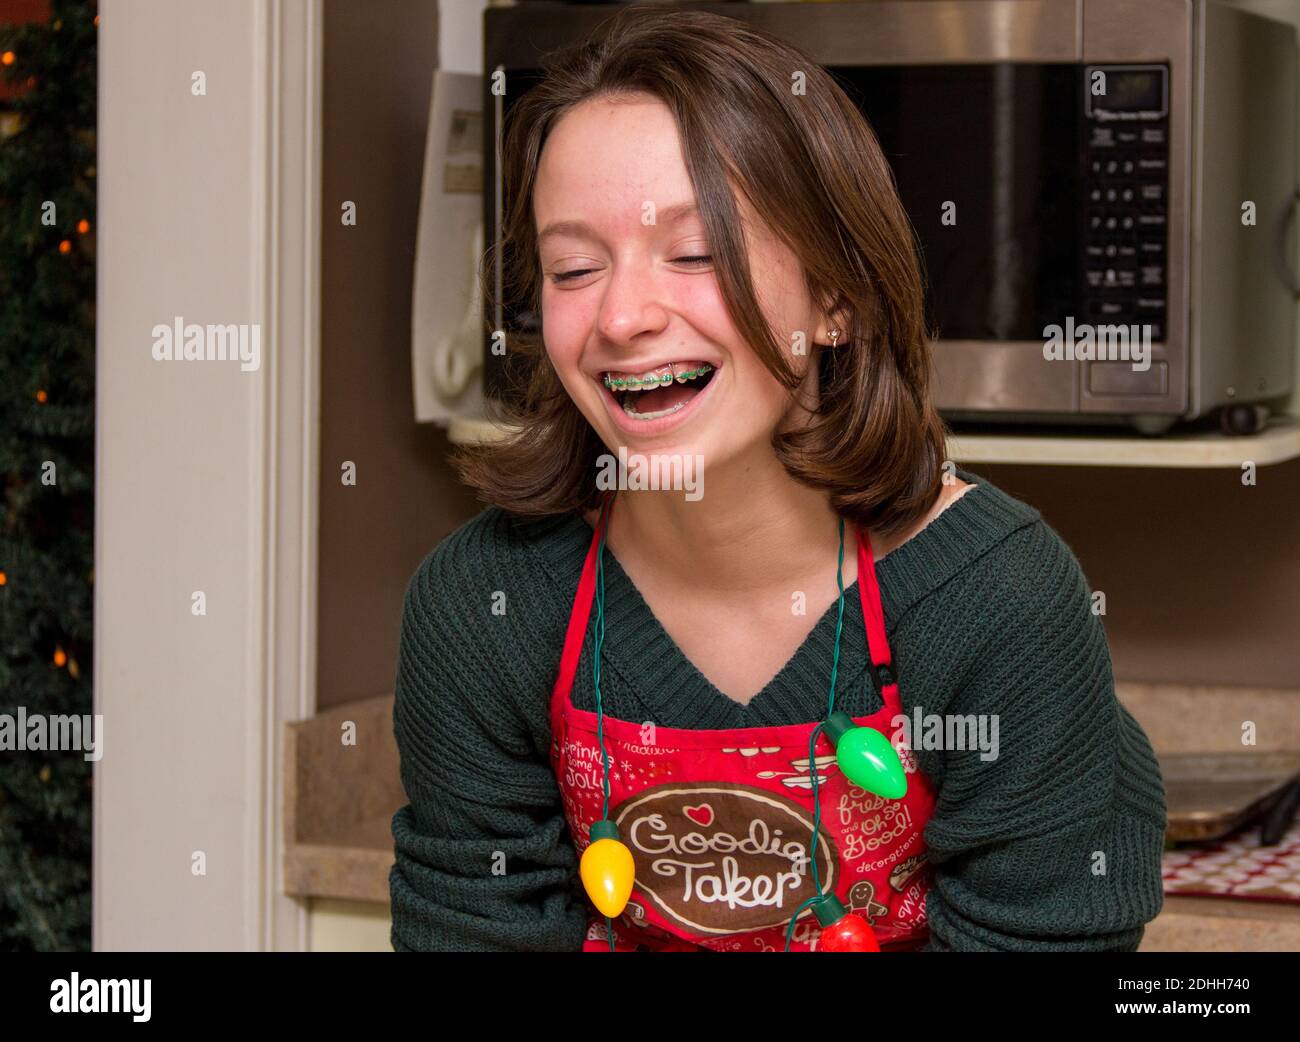 Young girl laughing in green sweater with christmas apron on in kitchen of house. Girl is wearing a necklace of fake christmas lights around her neck. Stock Photo